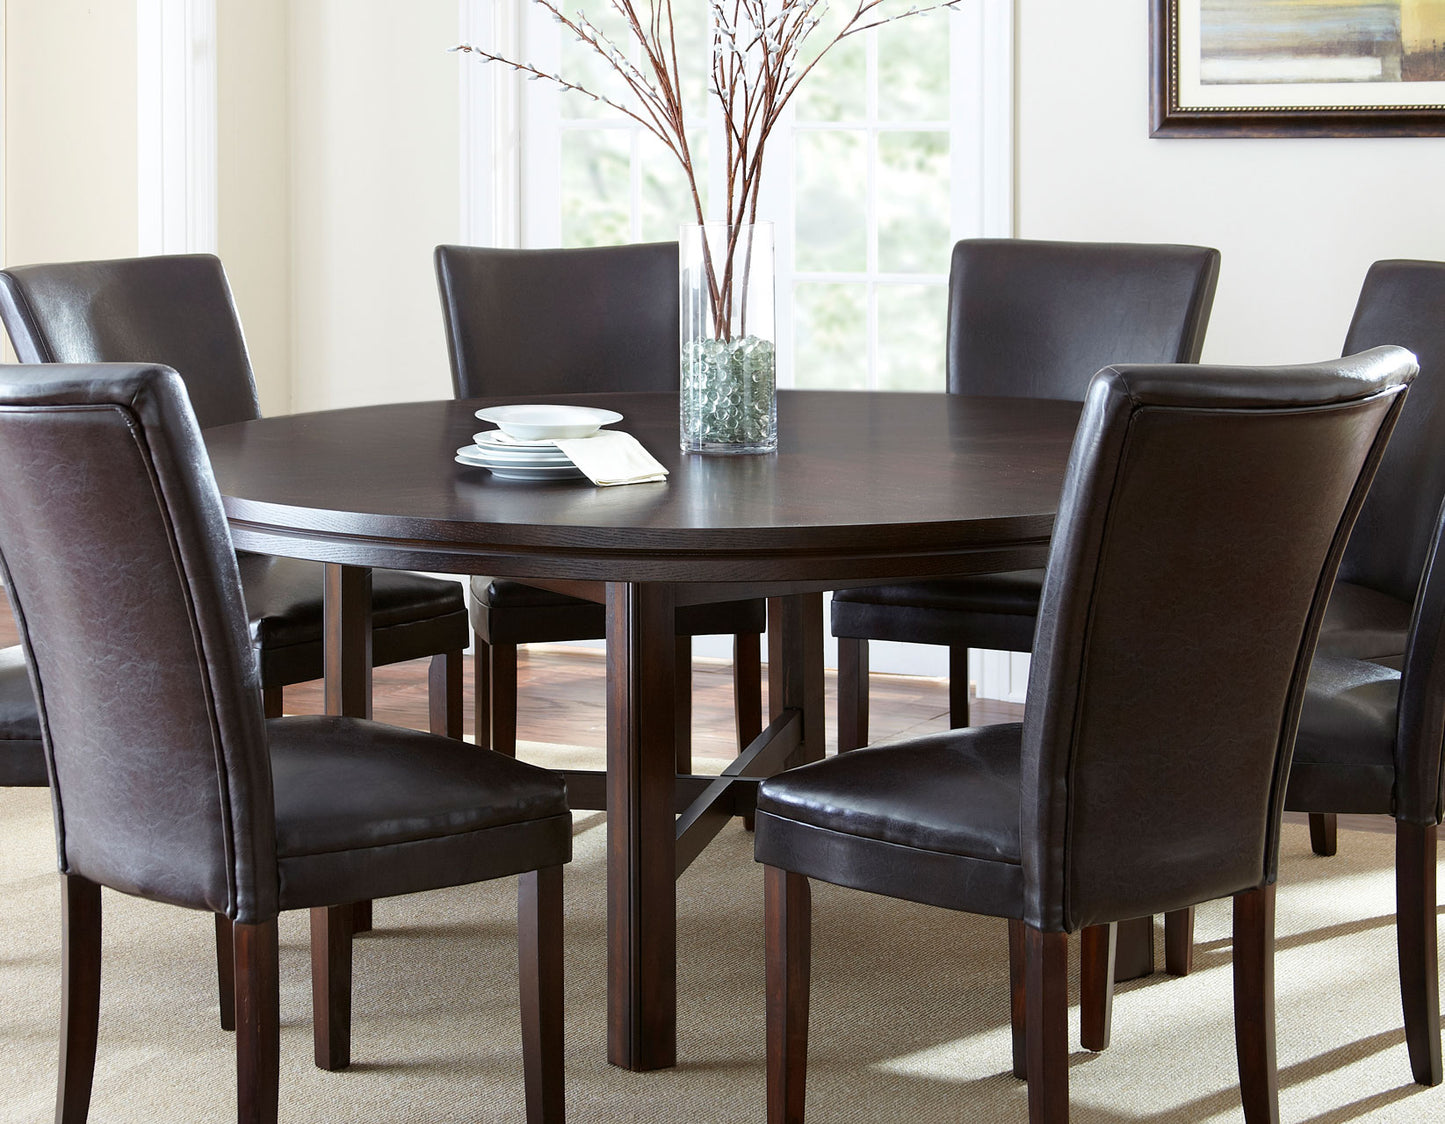 Hartford 72 inch table 7 Piece Set, Brown Chairs
(Table & 6 Side Chairs)